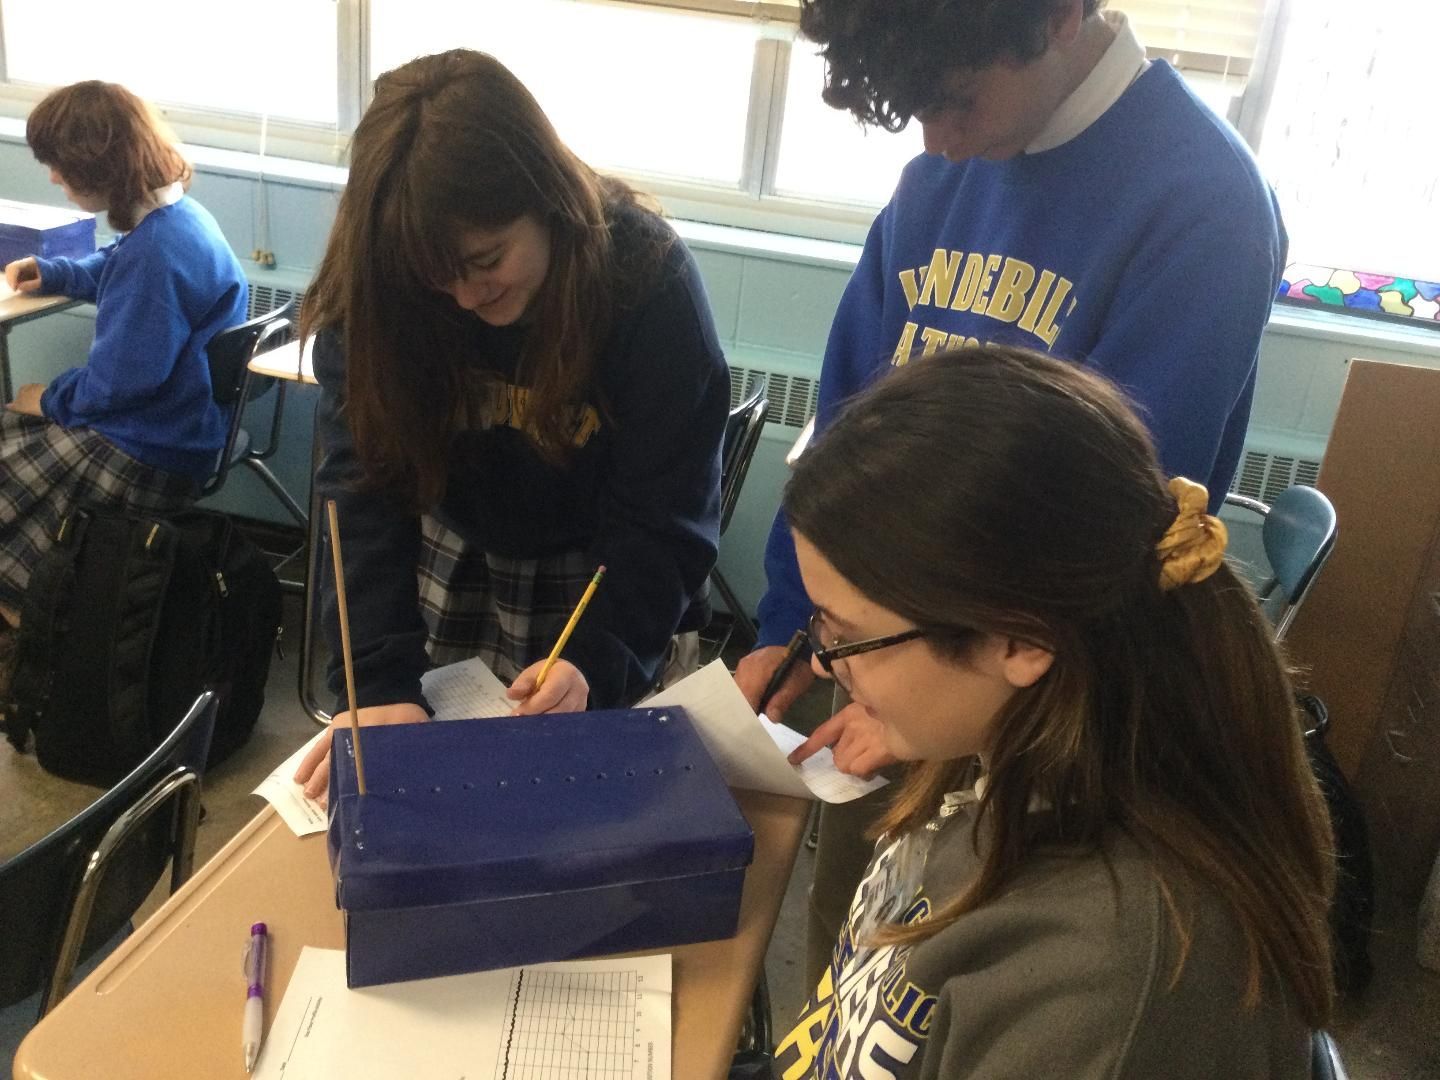 A group of students in a classroom with one wearing a sweatshirt that says ' ucsd ' on it